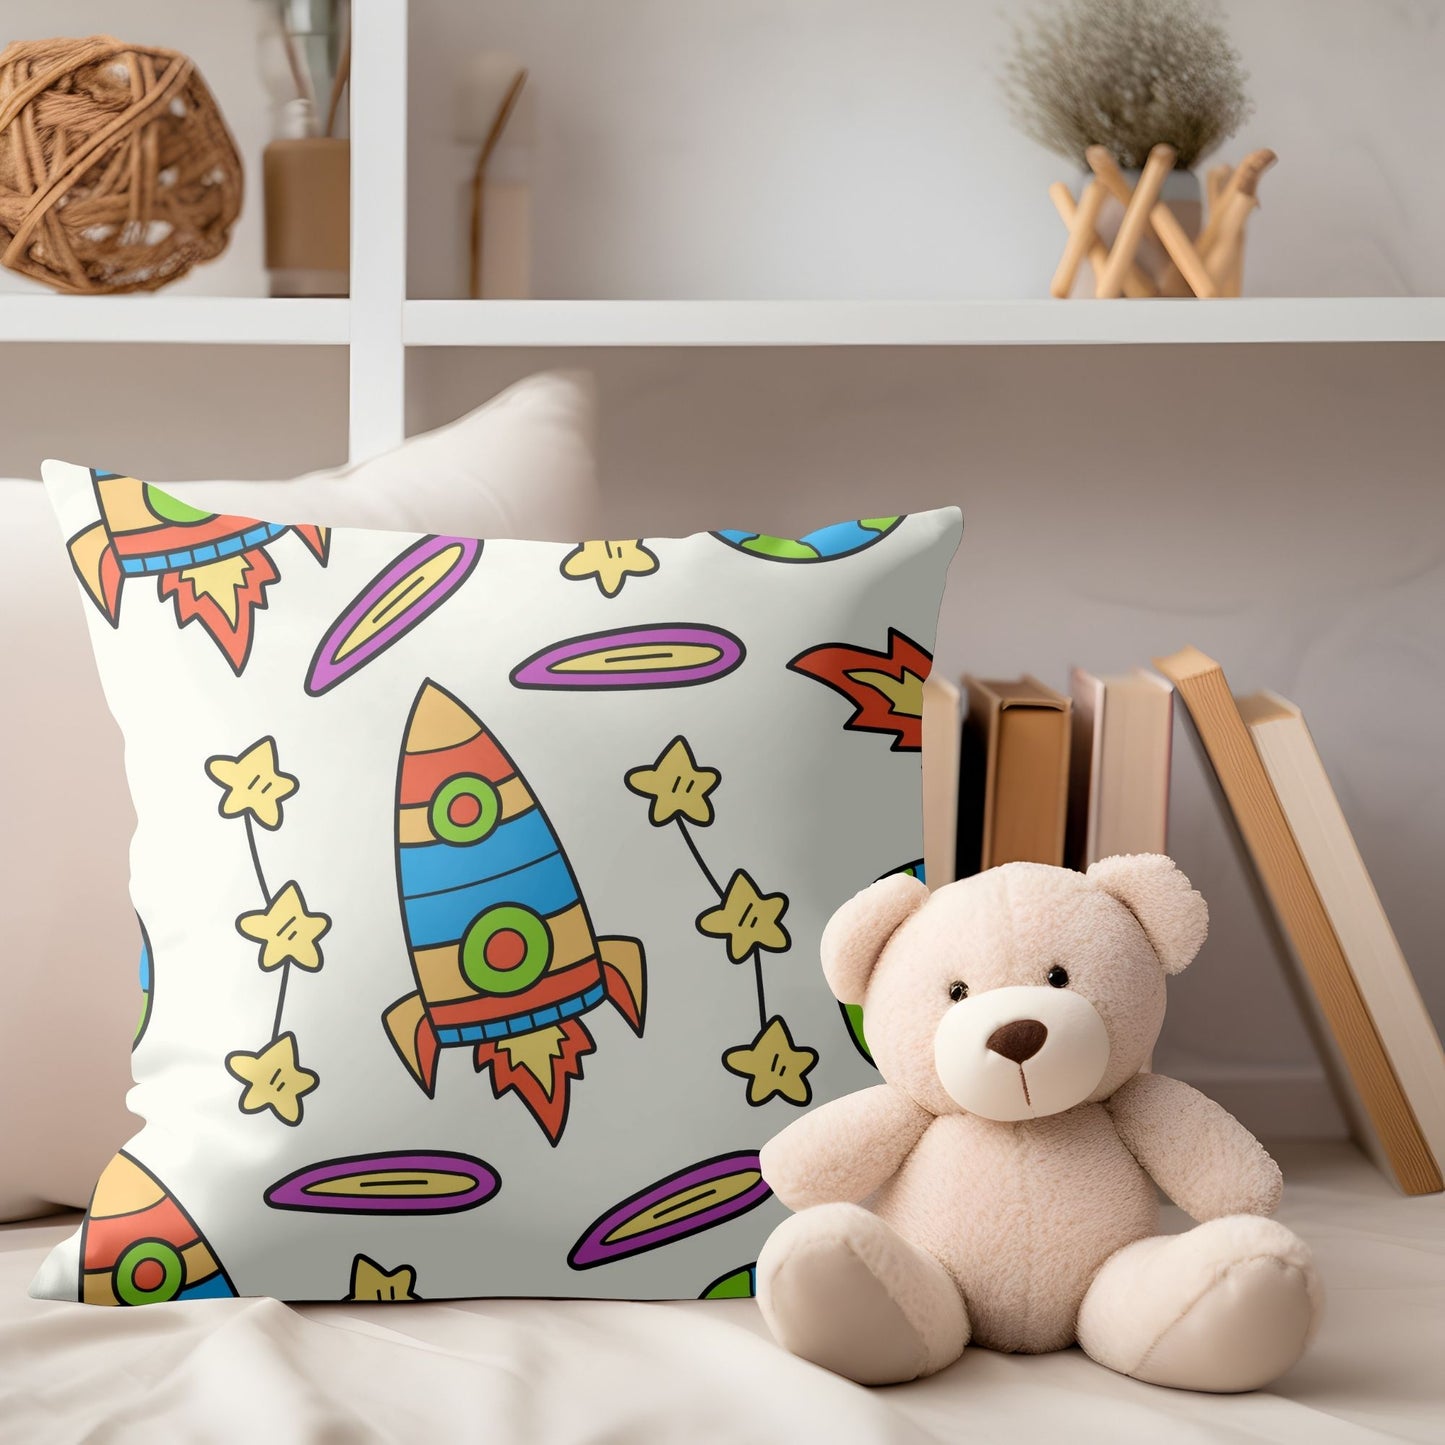 Space-themed kids pillow with rockets and stars for adventurous dreams.